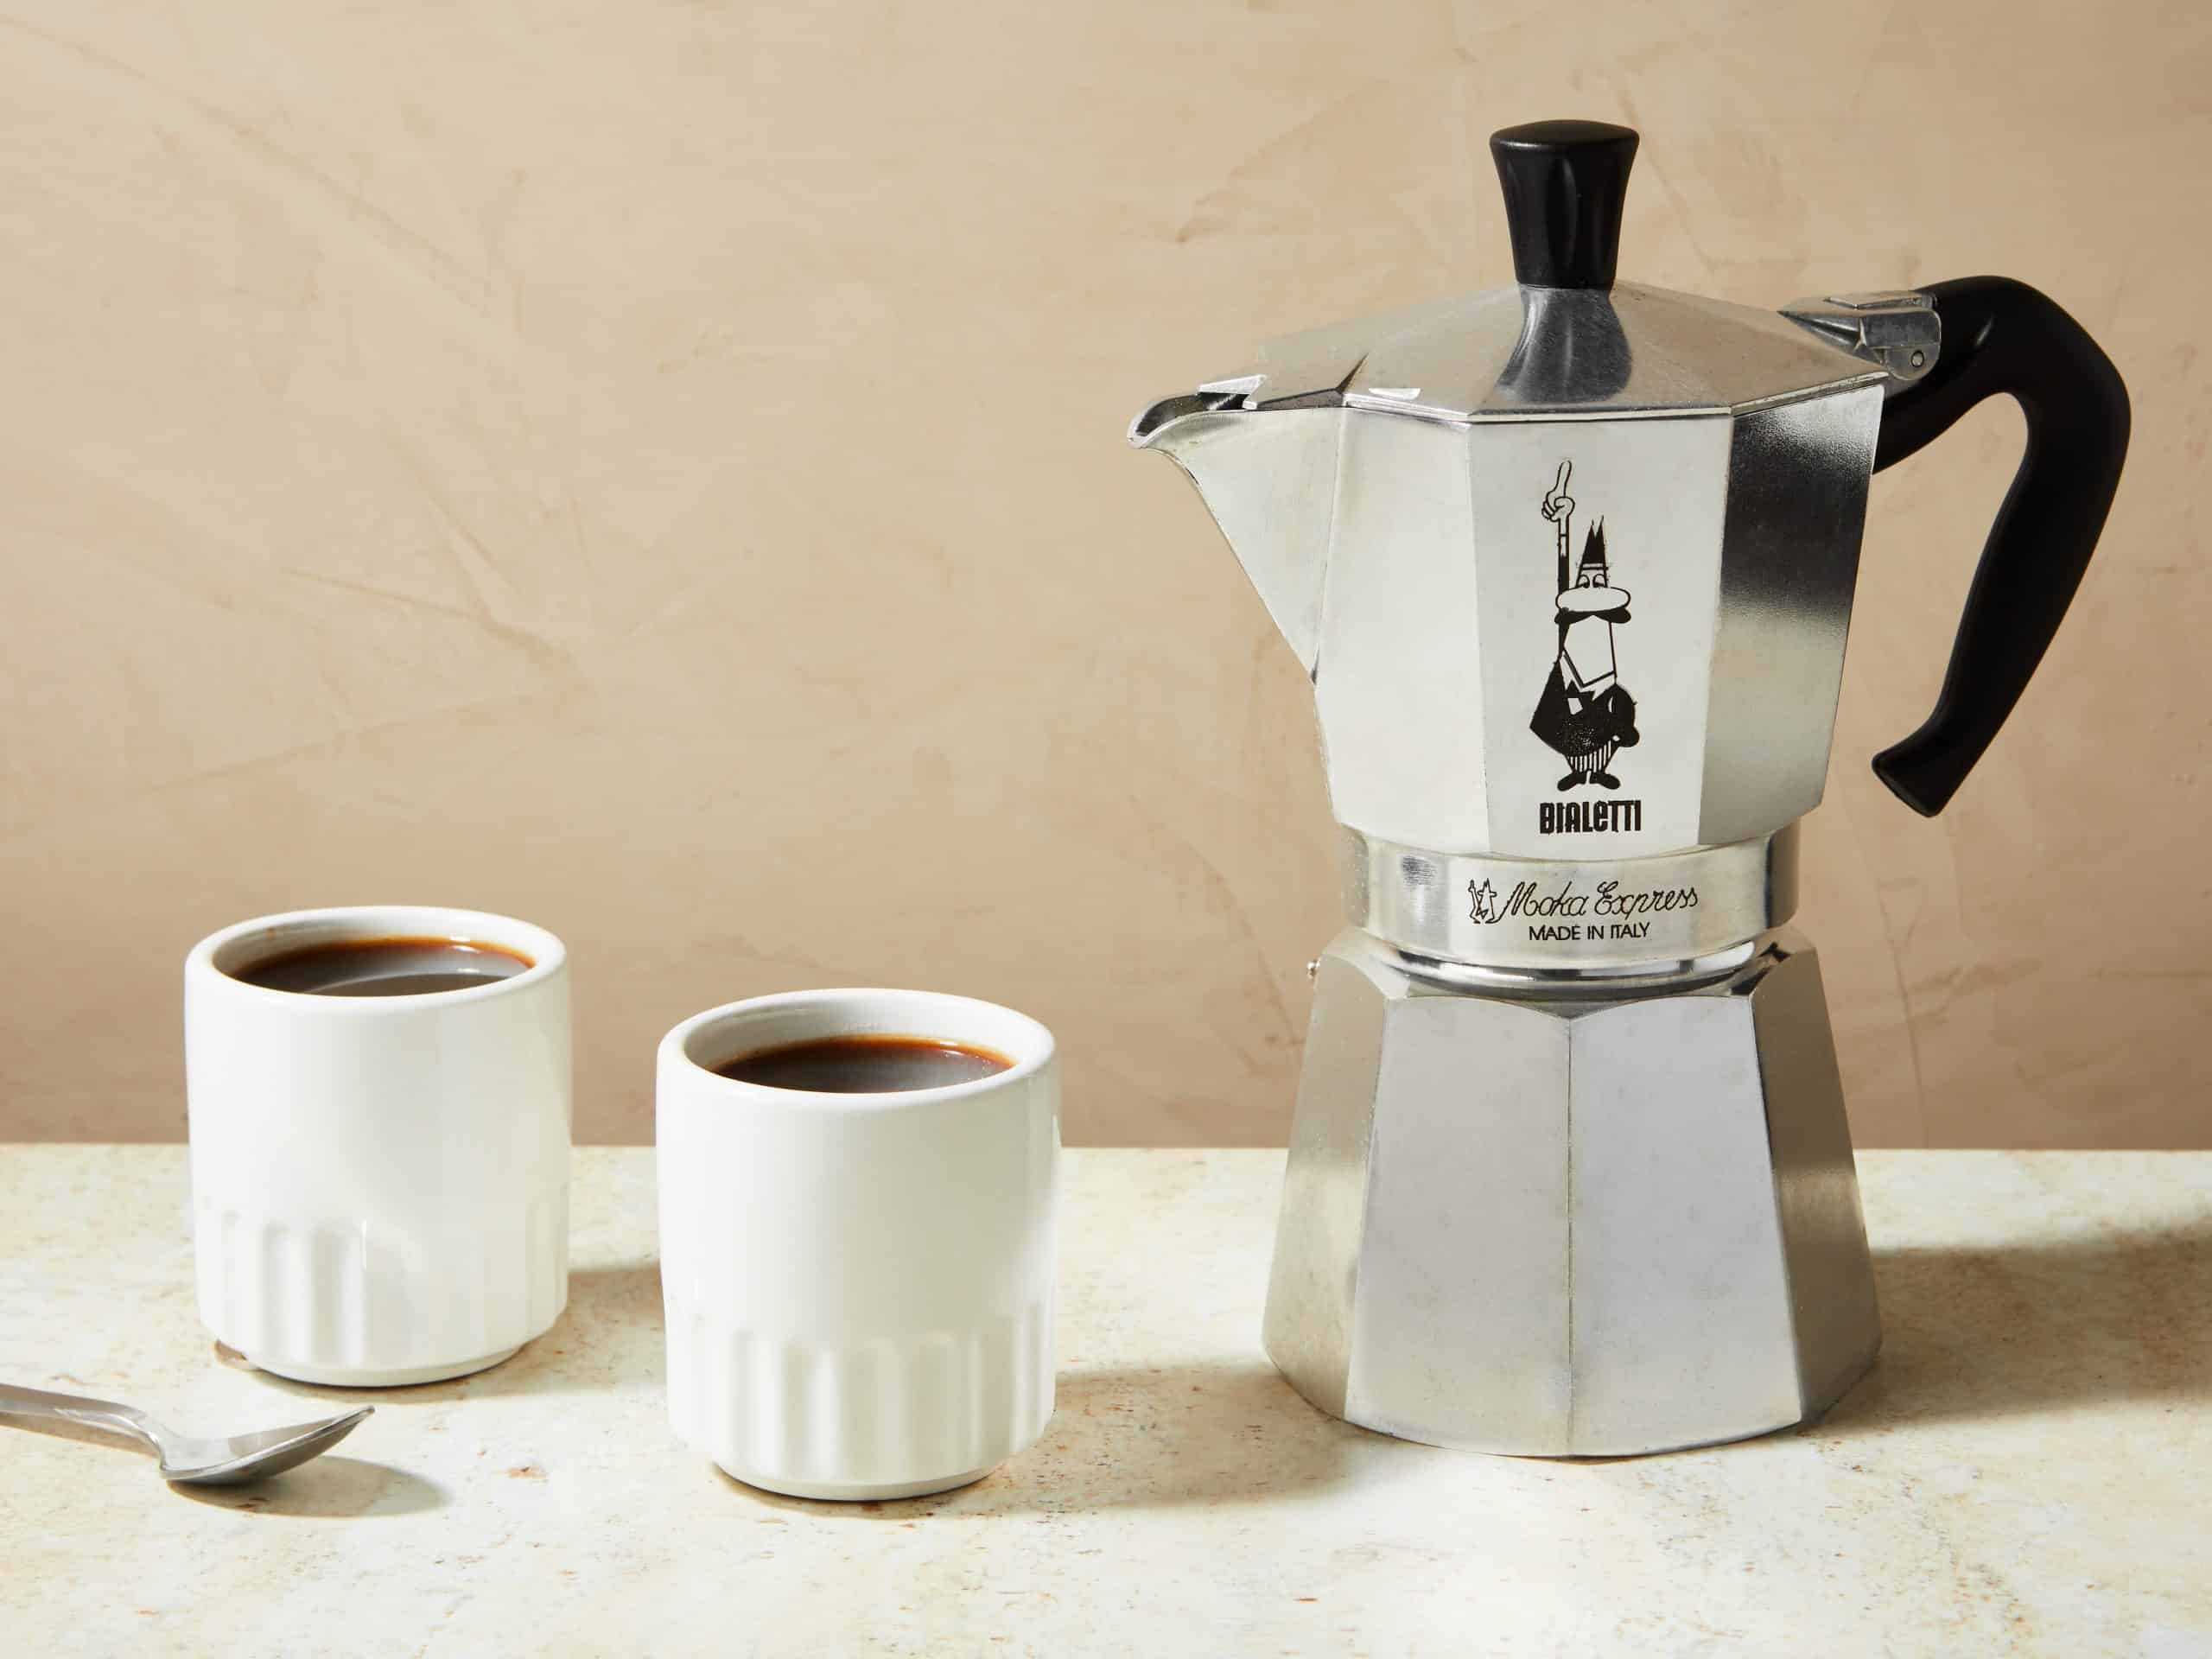 Is Bialetti For Coffee Or Espresso?